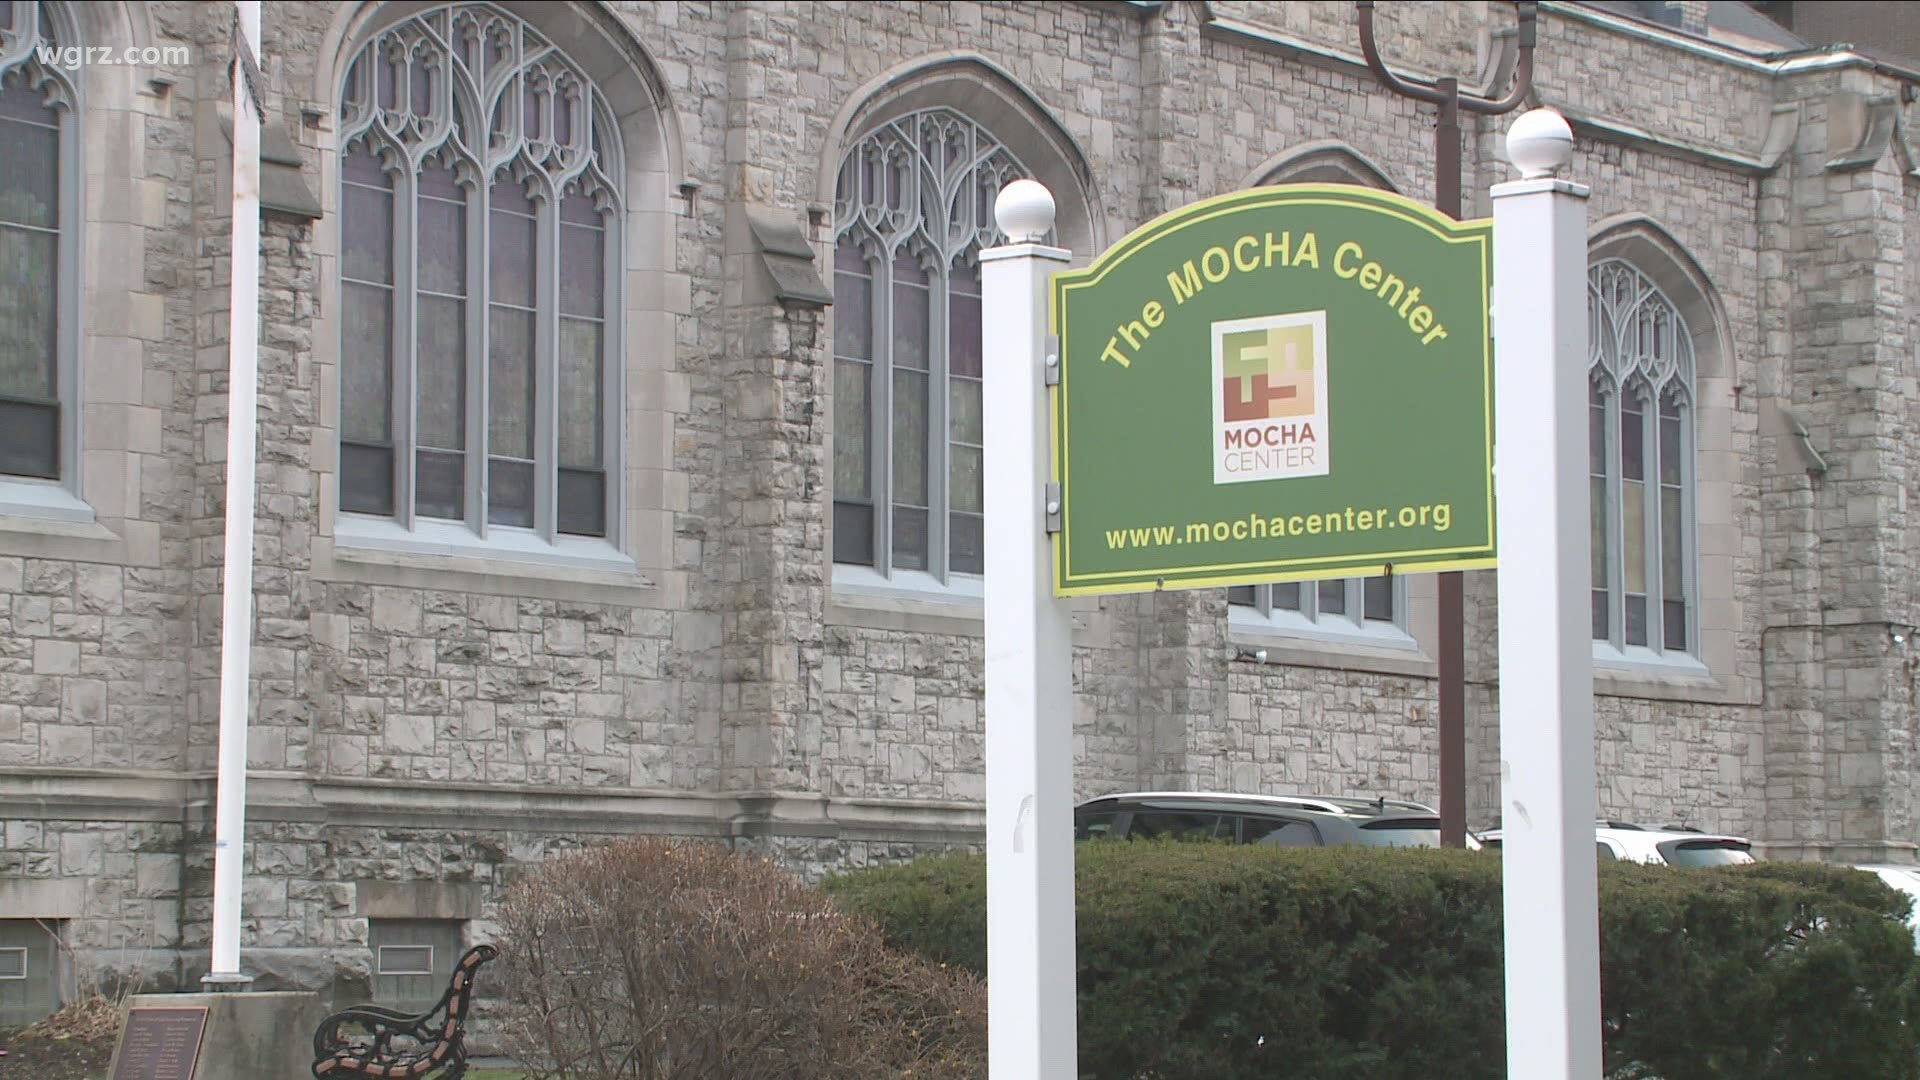 The Mocha Center in Buffalo is holding a gift giveaway for LGBTQ children and people in need this weekend.